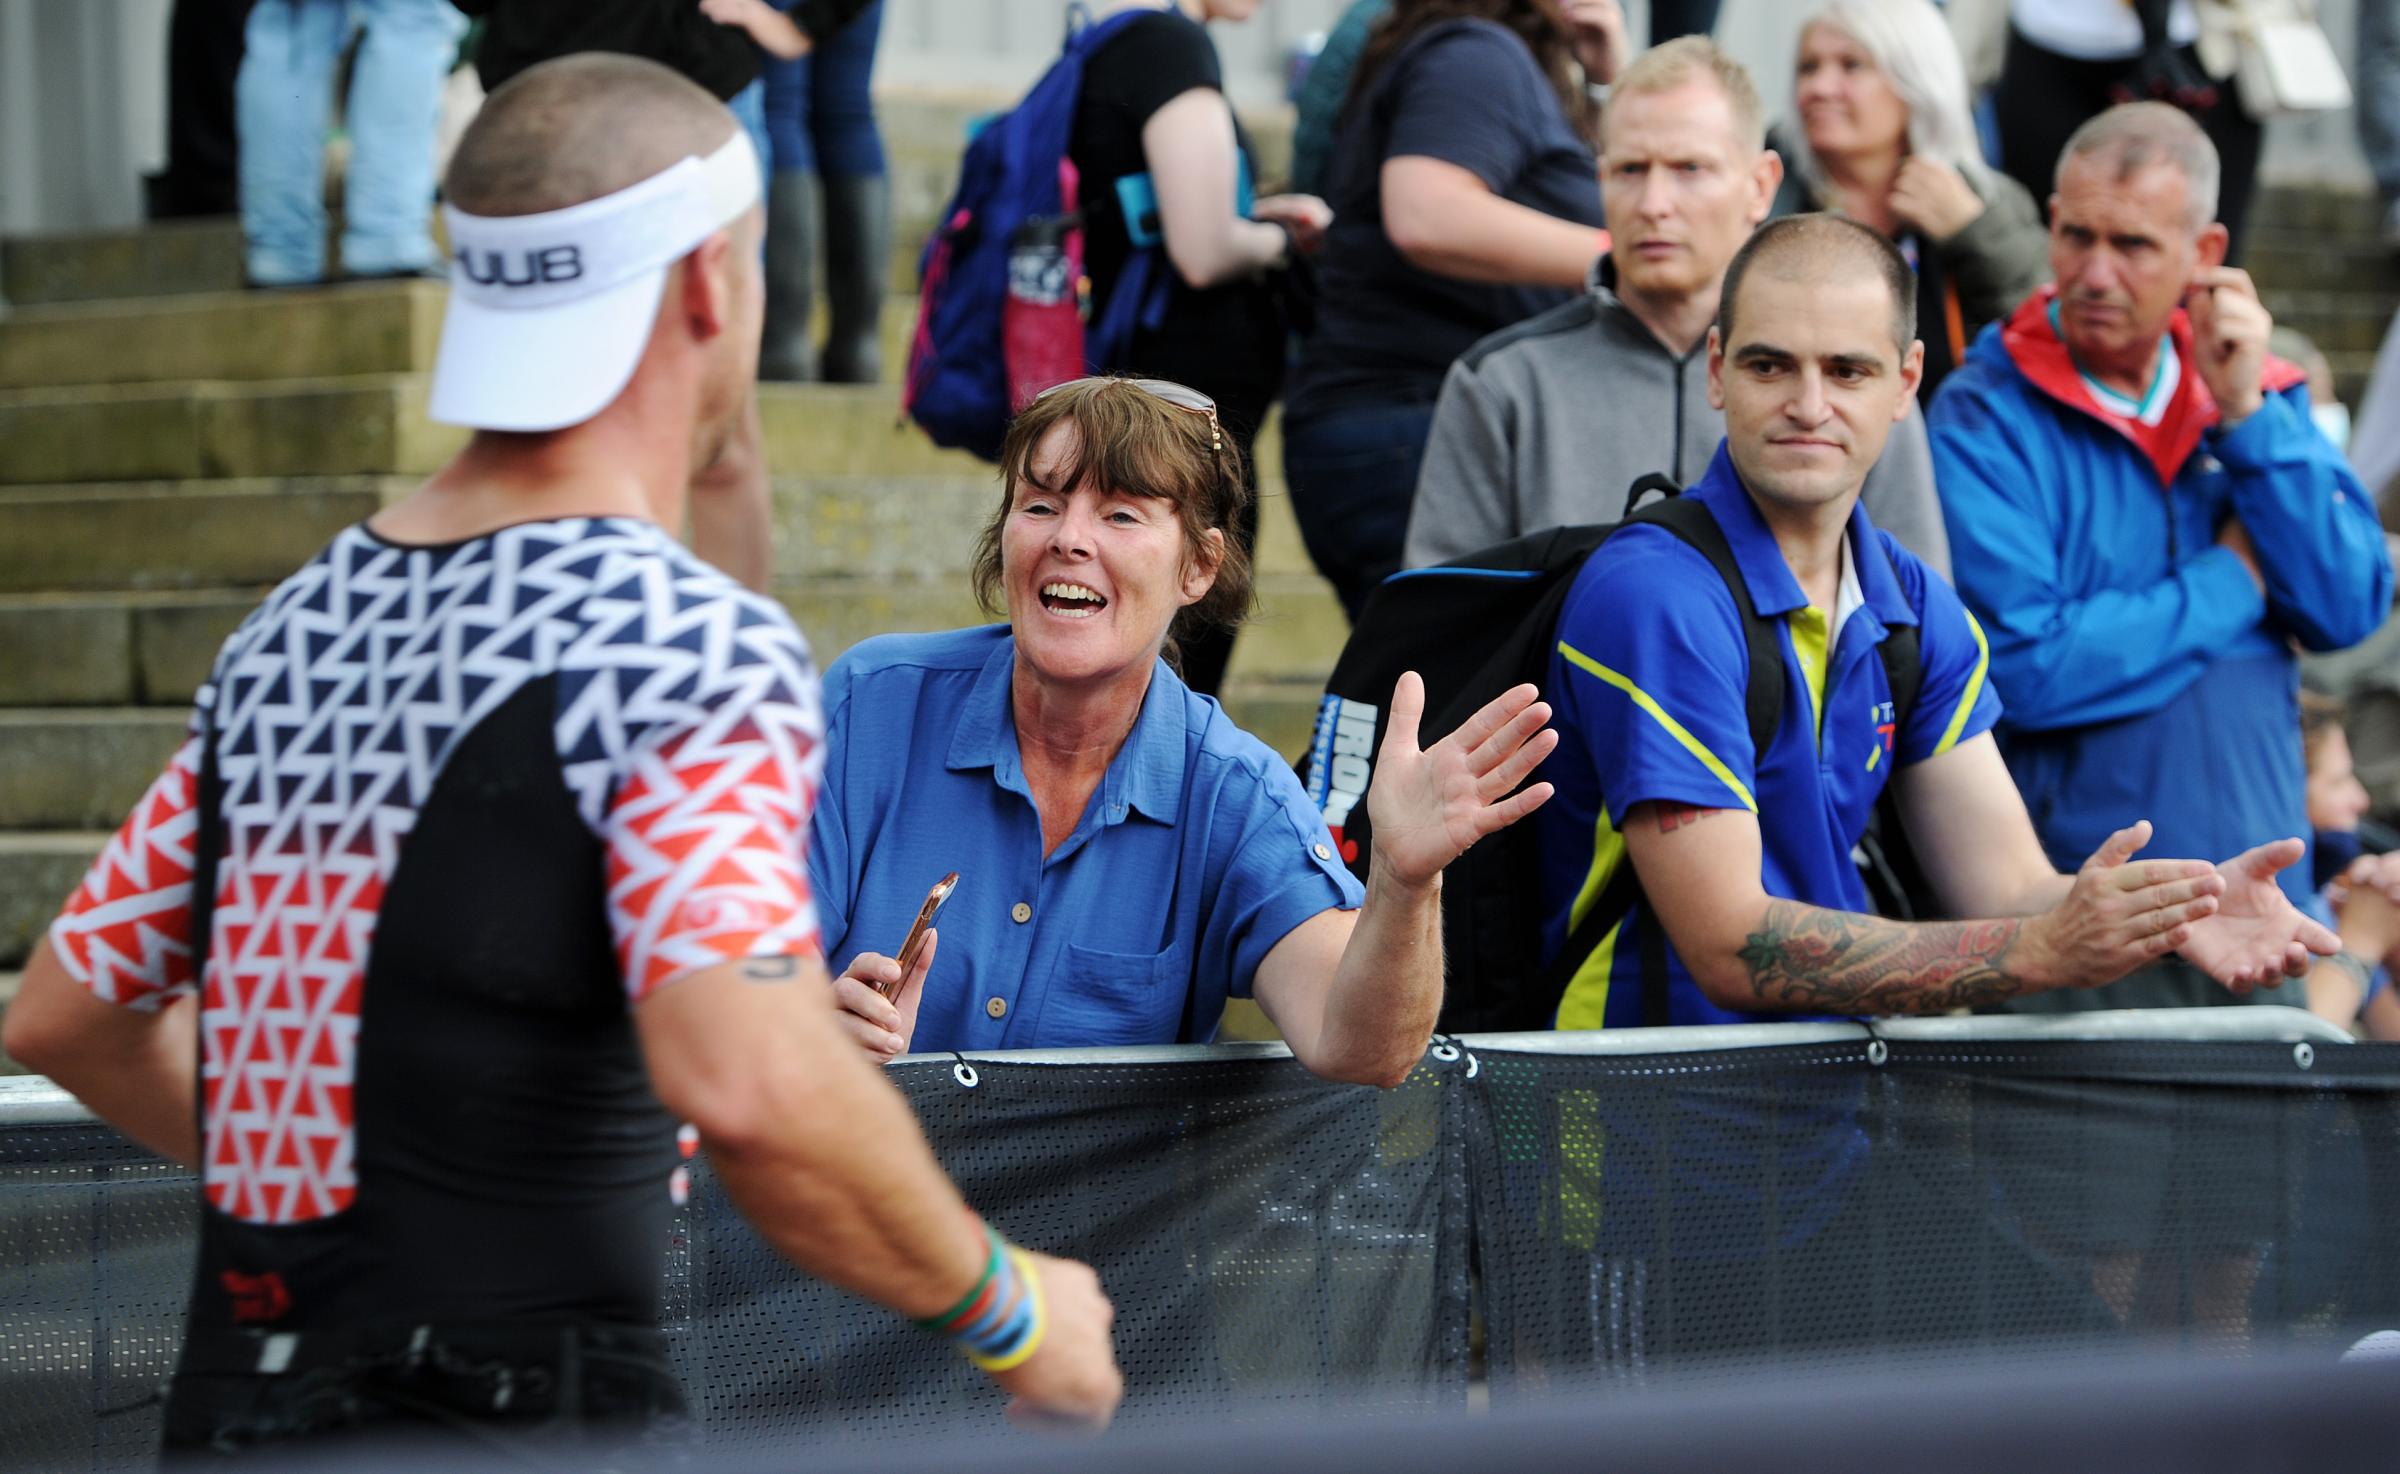 Excitement builds as crowds of people are expected to come to Bolton for Ironman